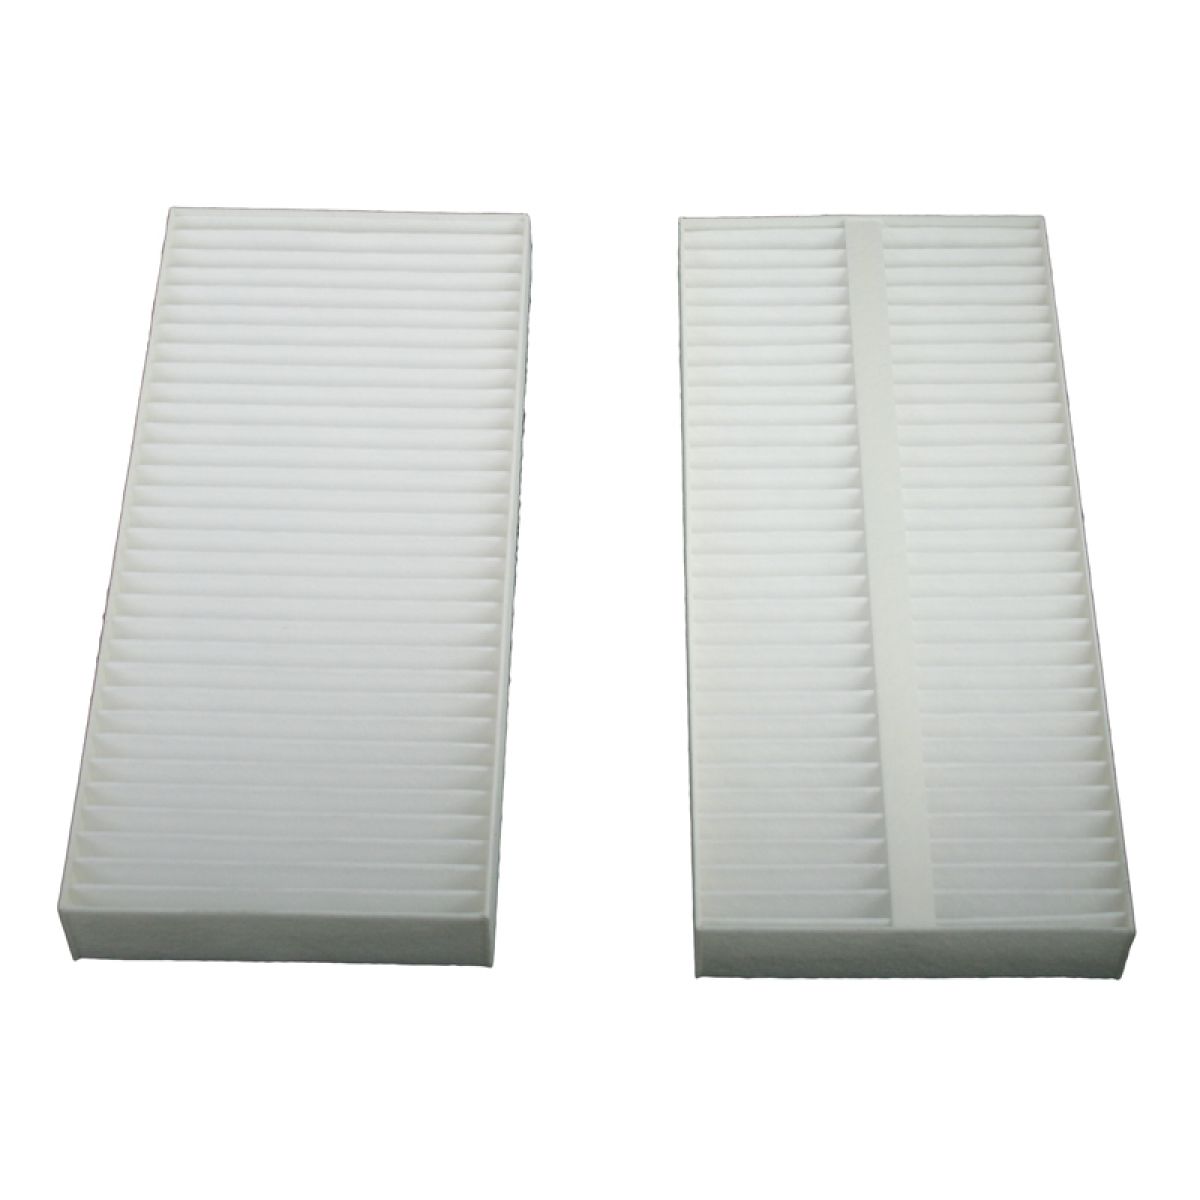 Cabin Air Filter Pair Set of 2 for Nissan Titan Armada QX56 NEW 999M1-VP055 | eBay 2017 Nissan Armada Cabin Air Filter Replacement